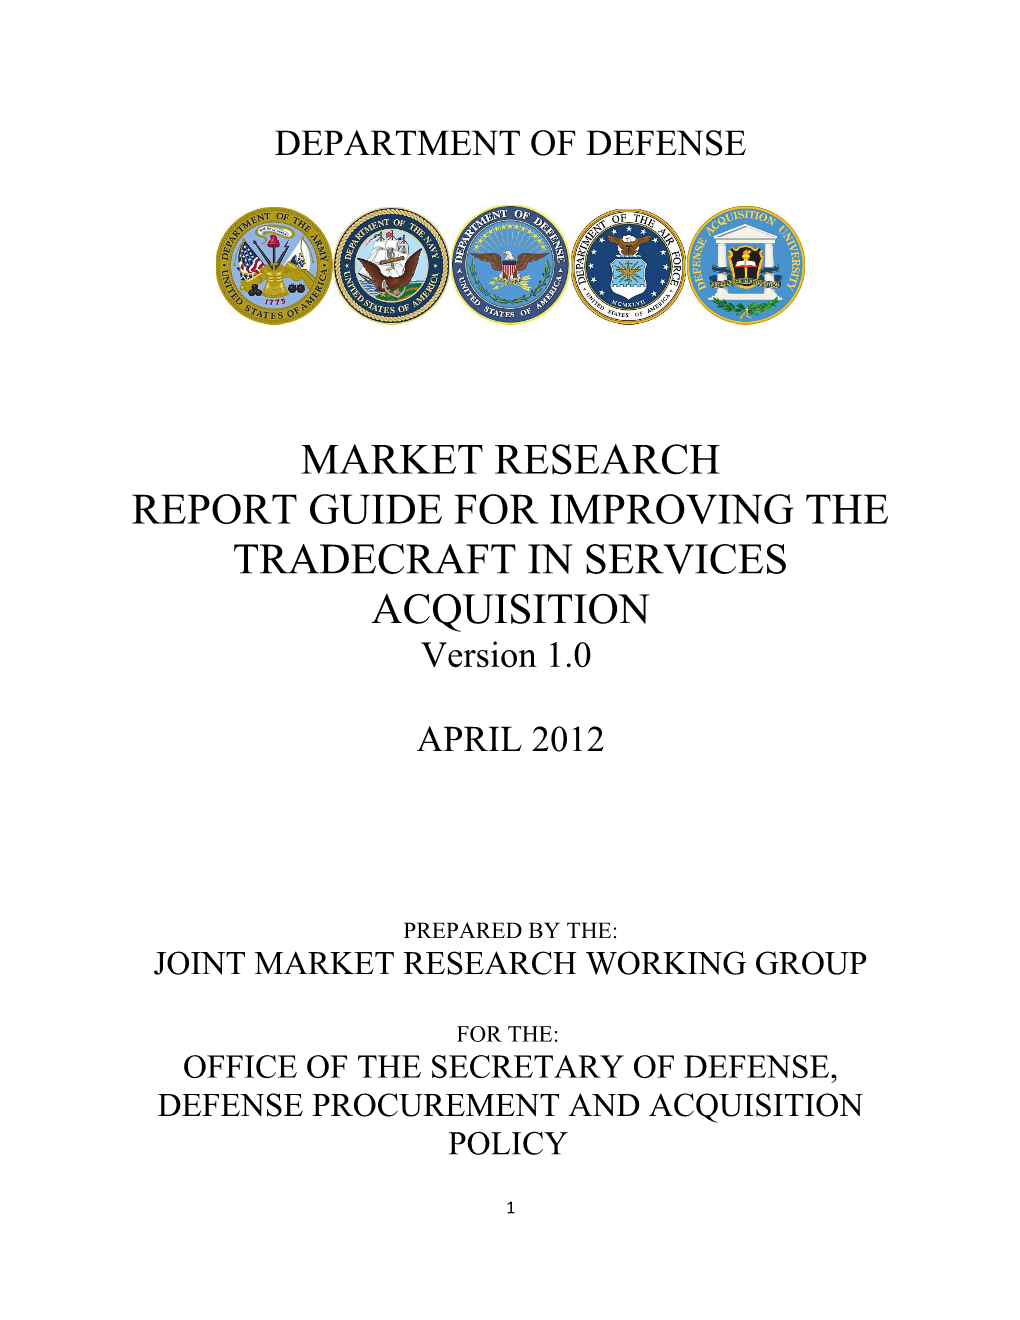 Report Guide for Improving the Tradecraft in Services Acquisition